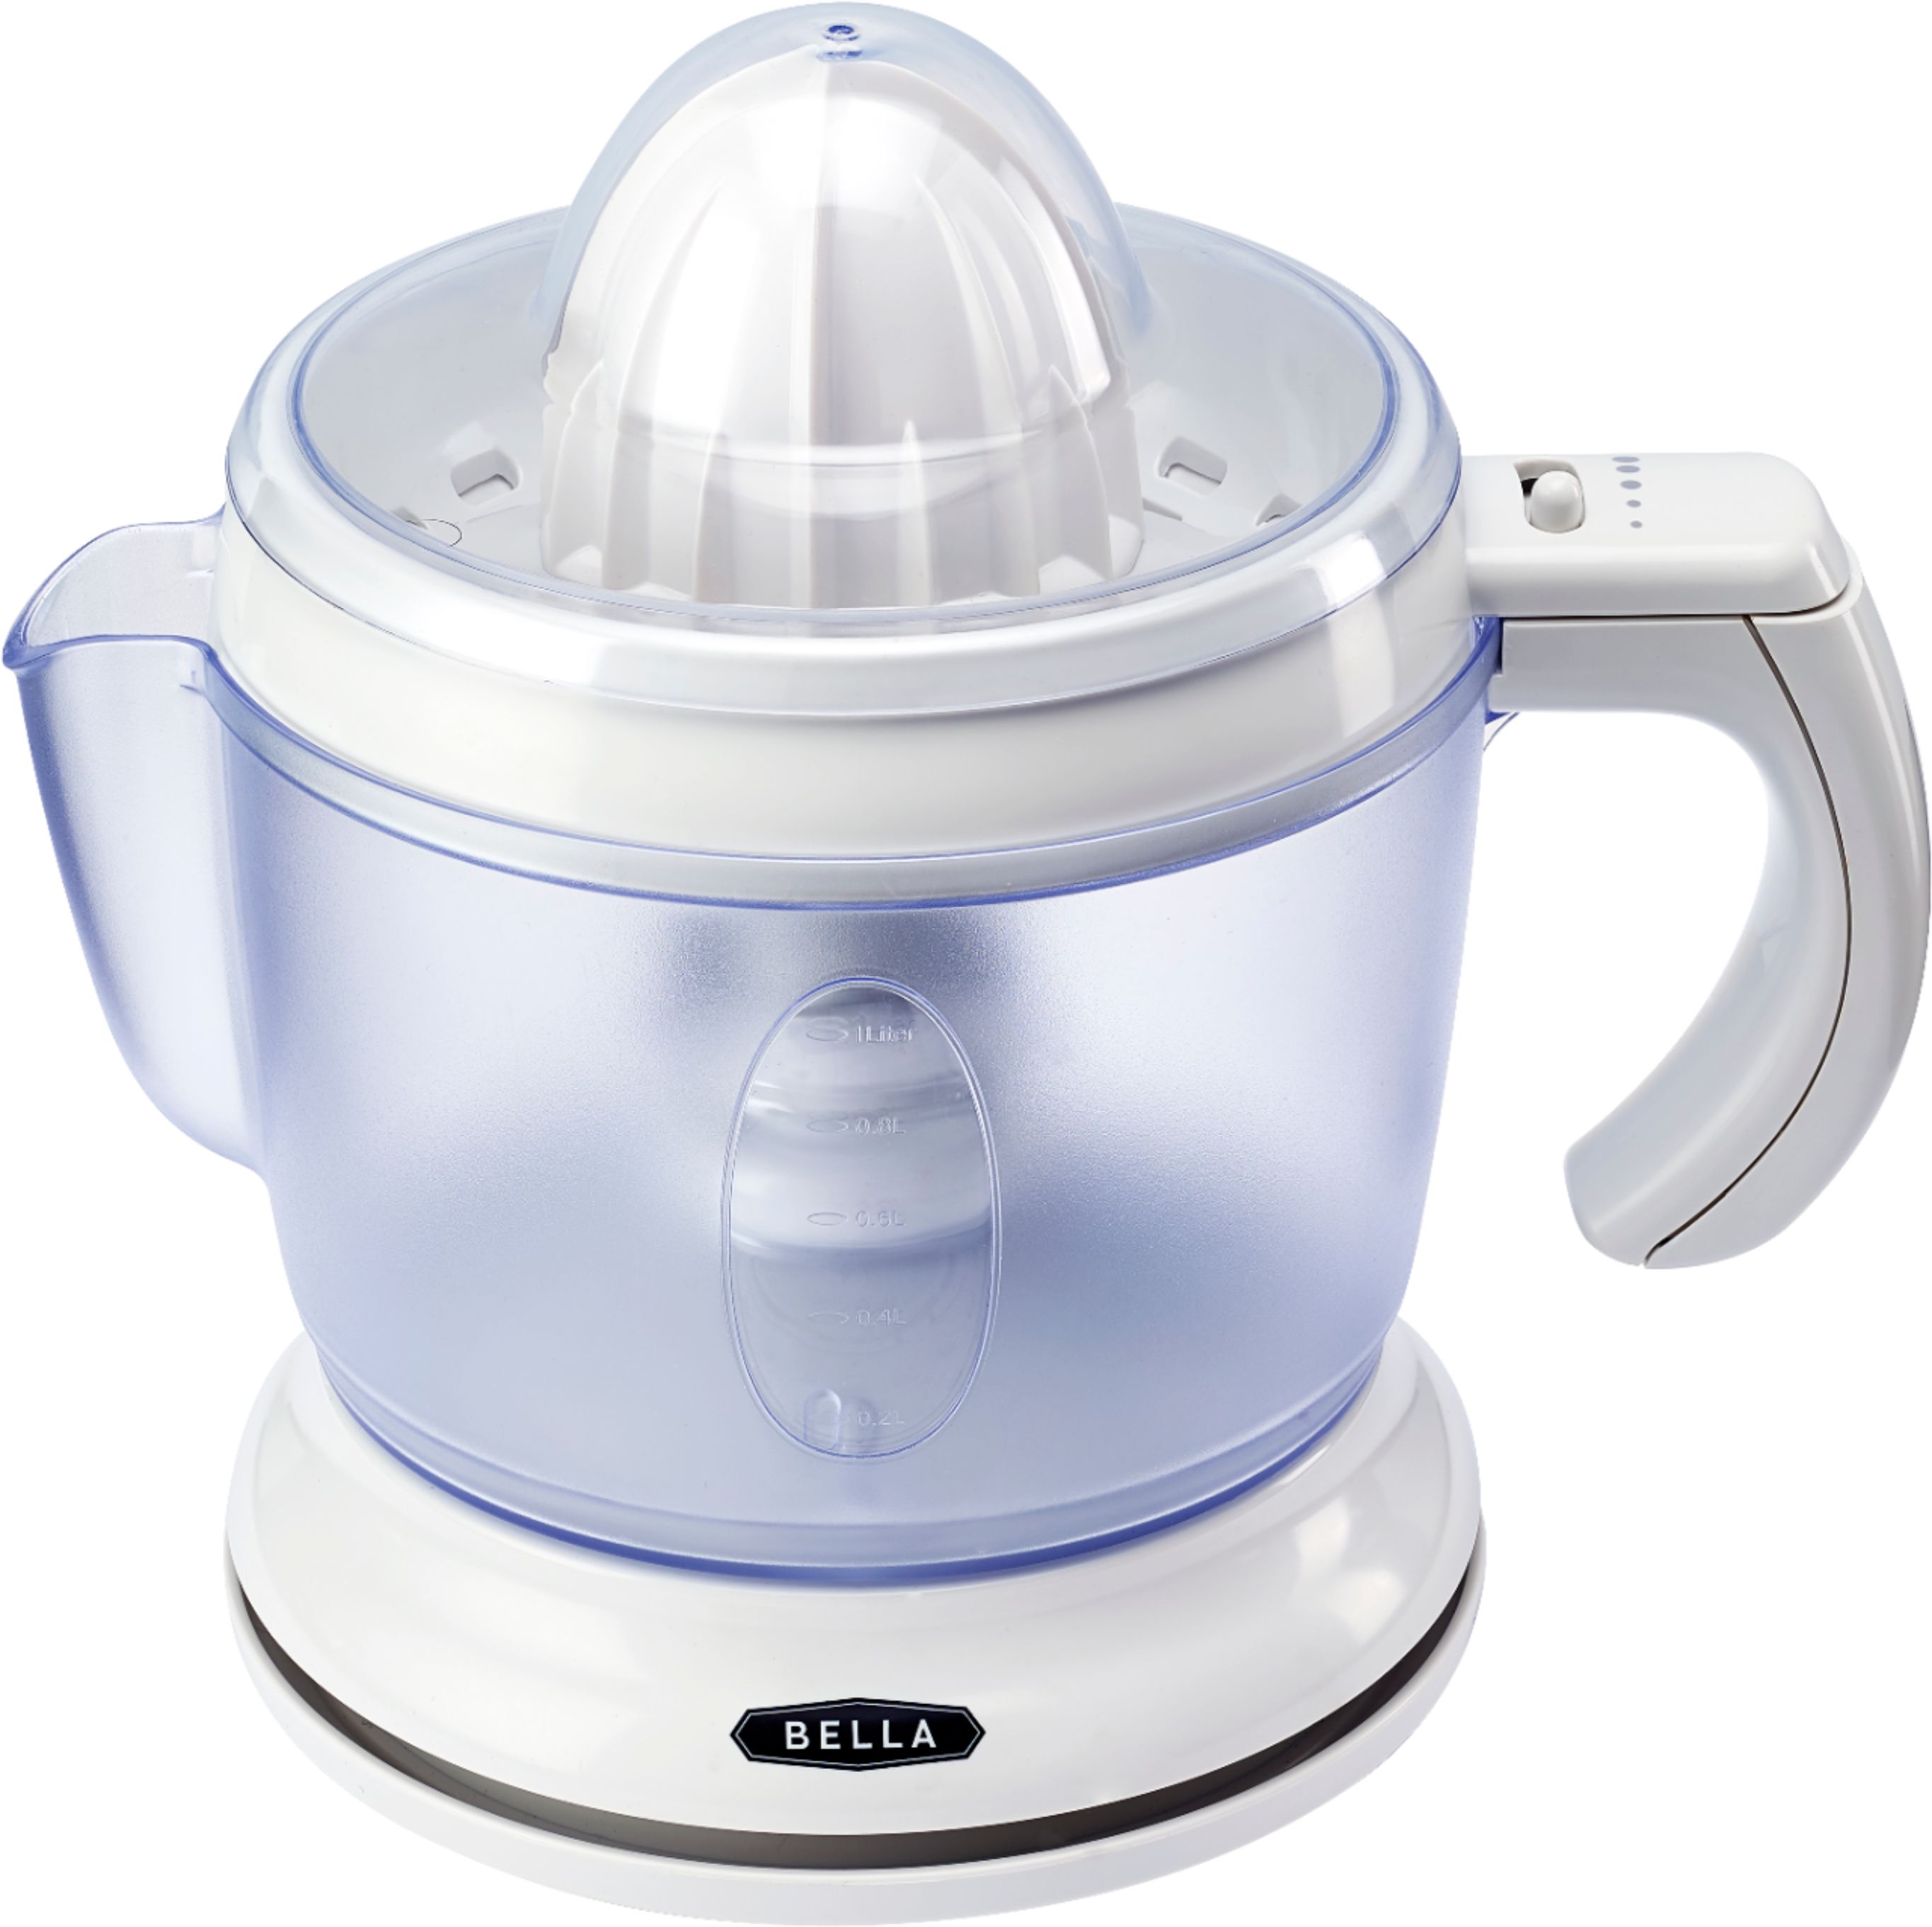  HOT DEAL Citrus Juicer Electric Bundle with Shaved Ice